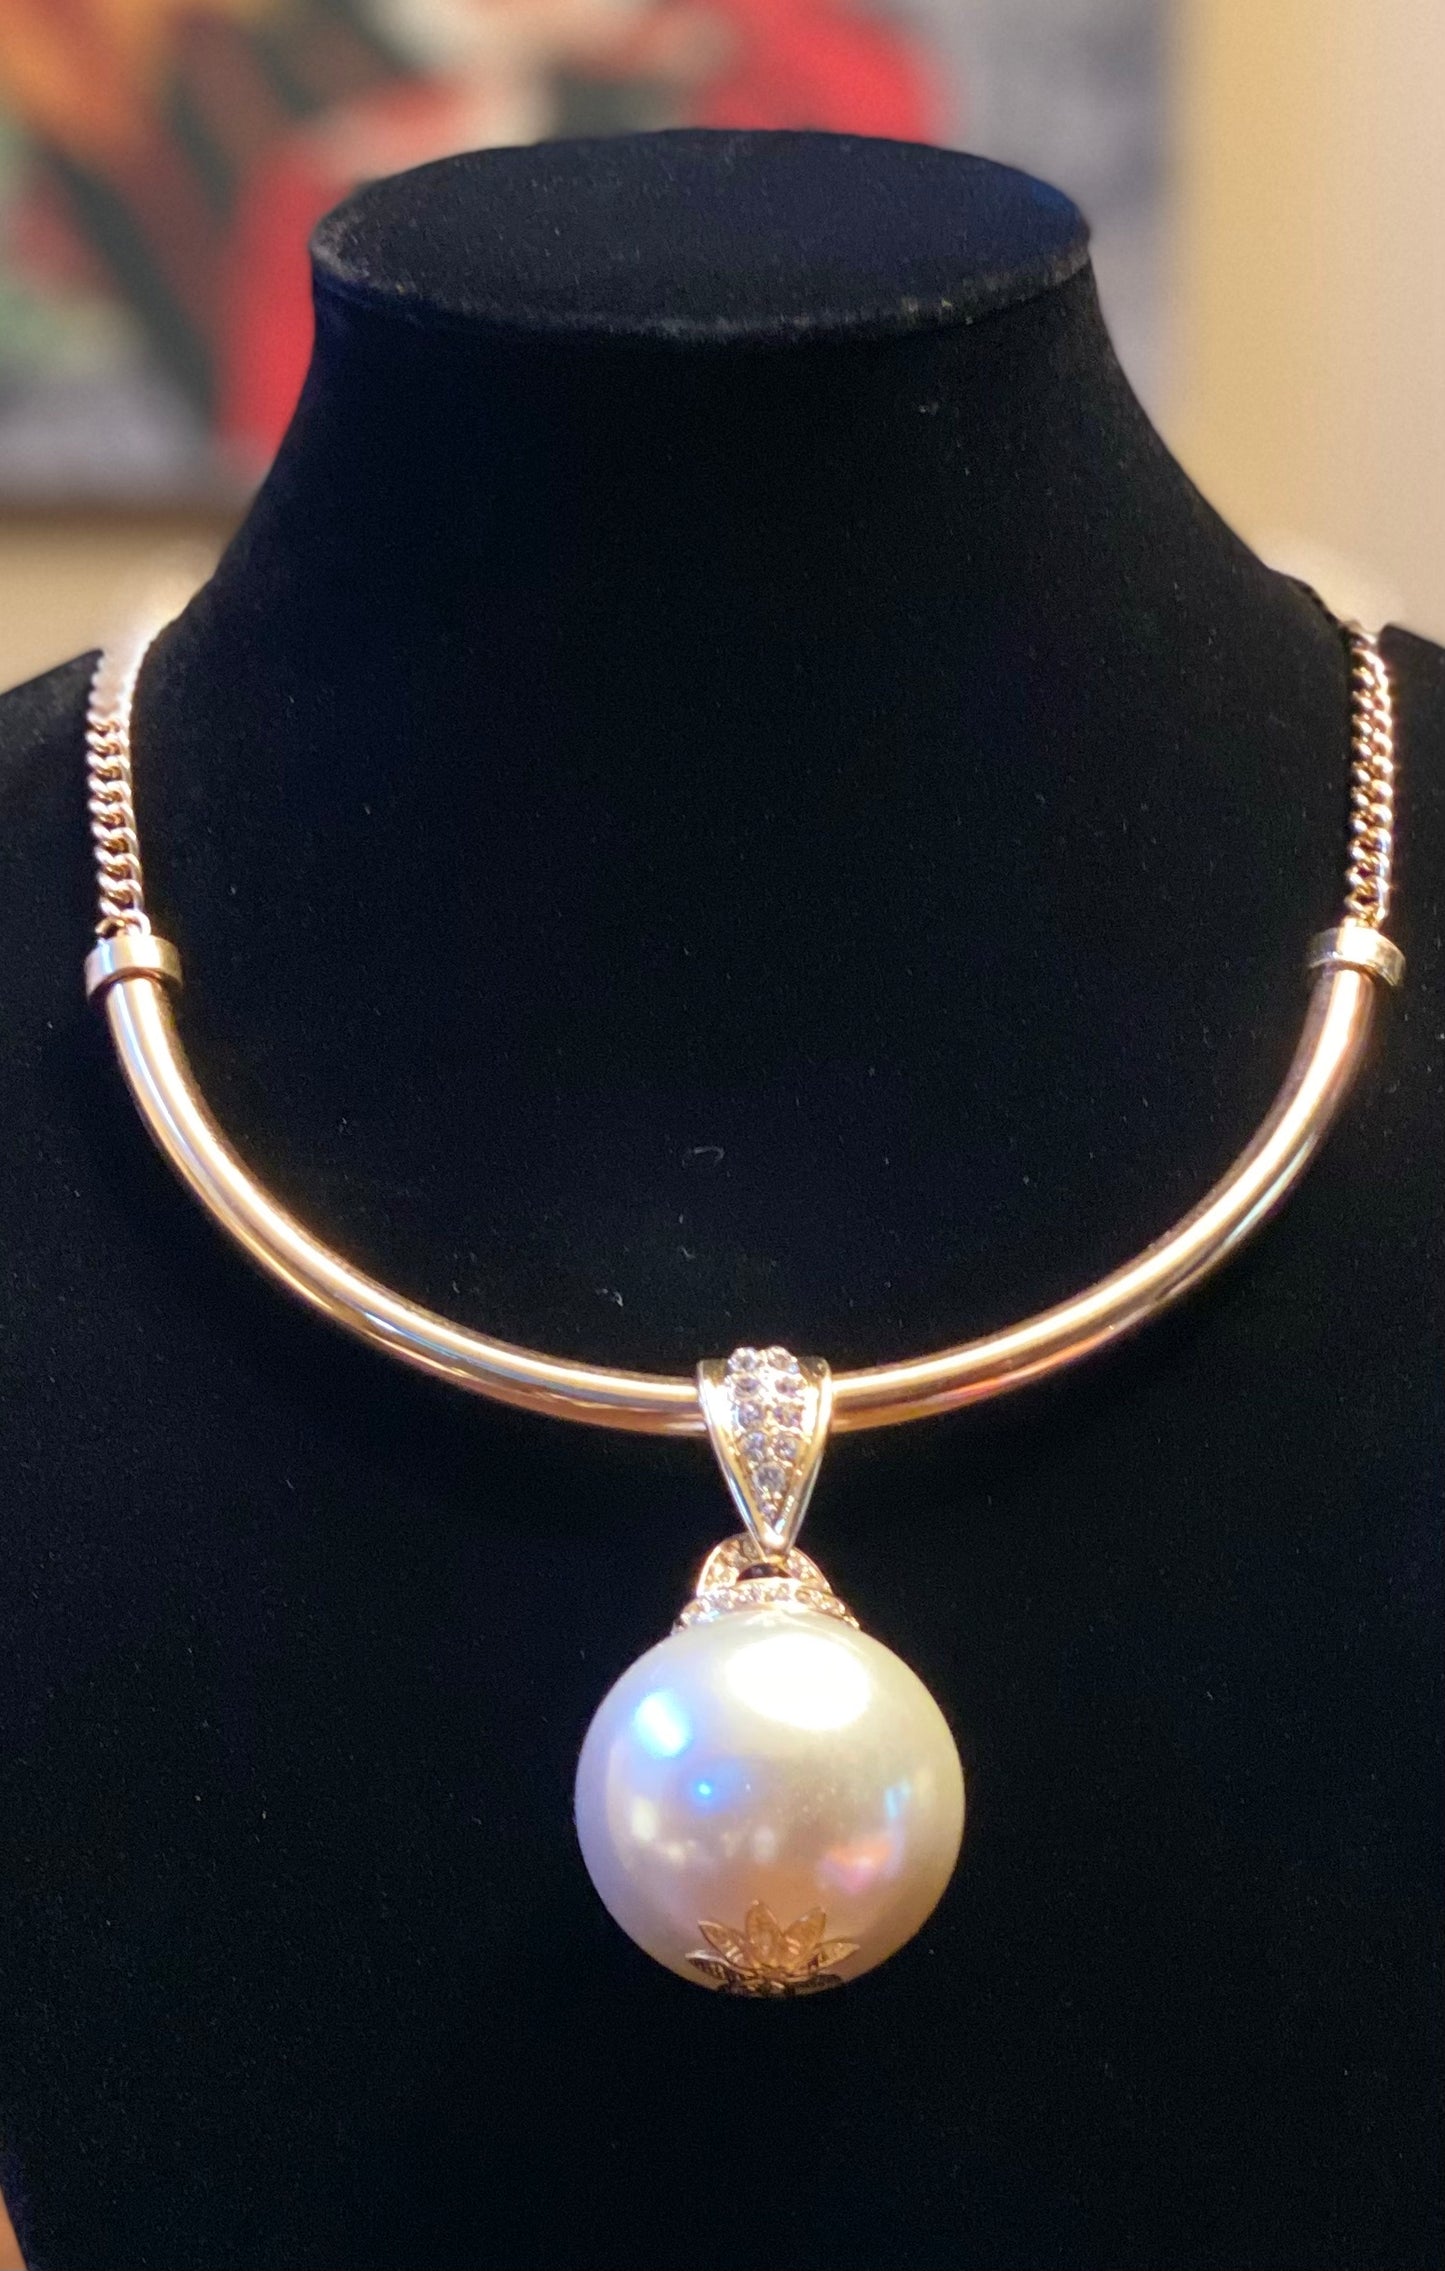 Ladies' Collar Necklace with Large Pearl Pendant